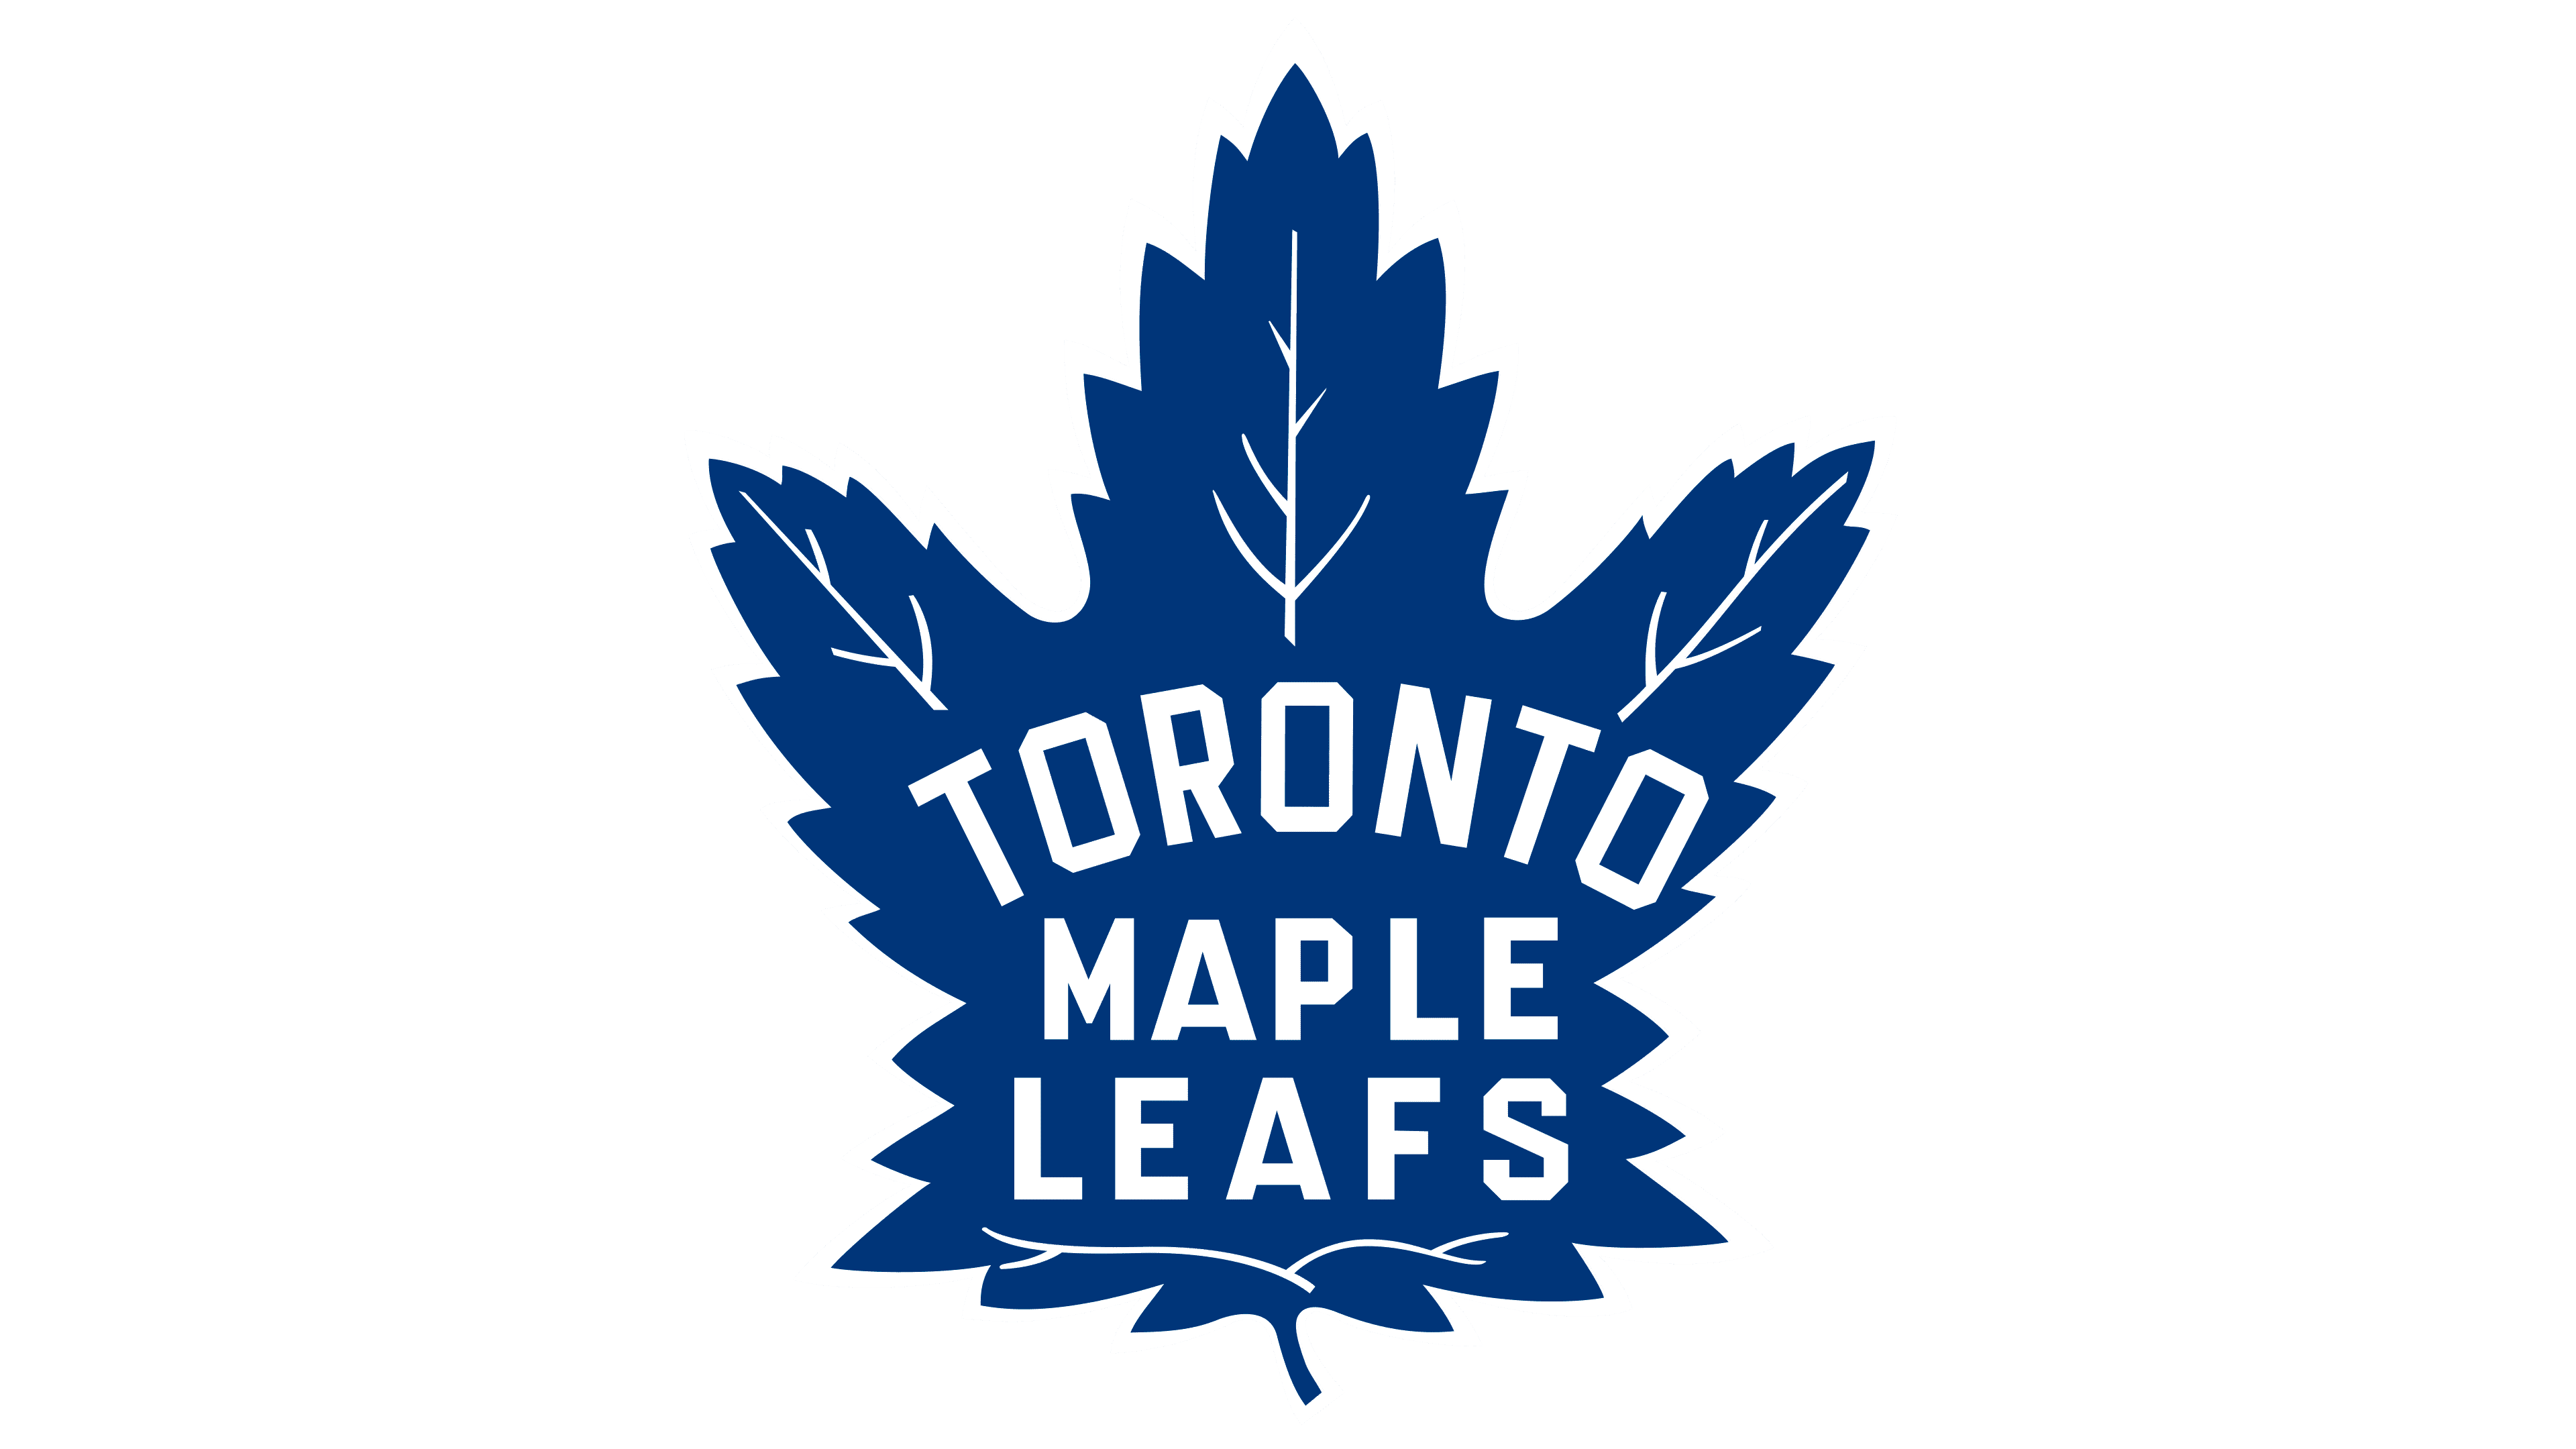 Toronto Maple Leafs Logo The Most Famous Brands And Company Logos In The World